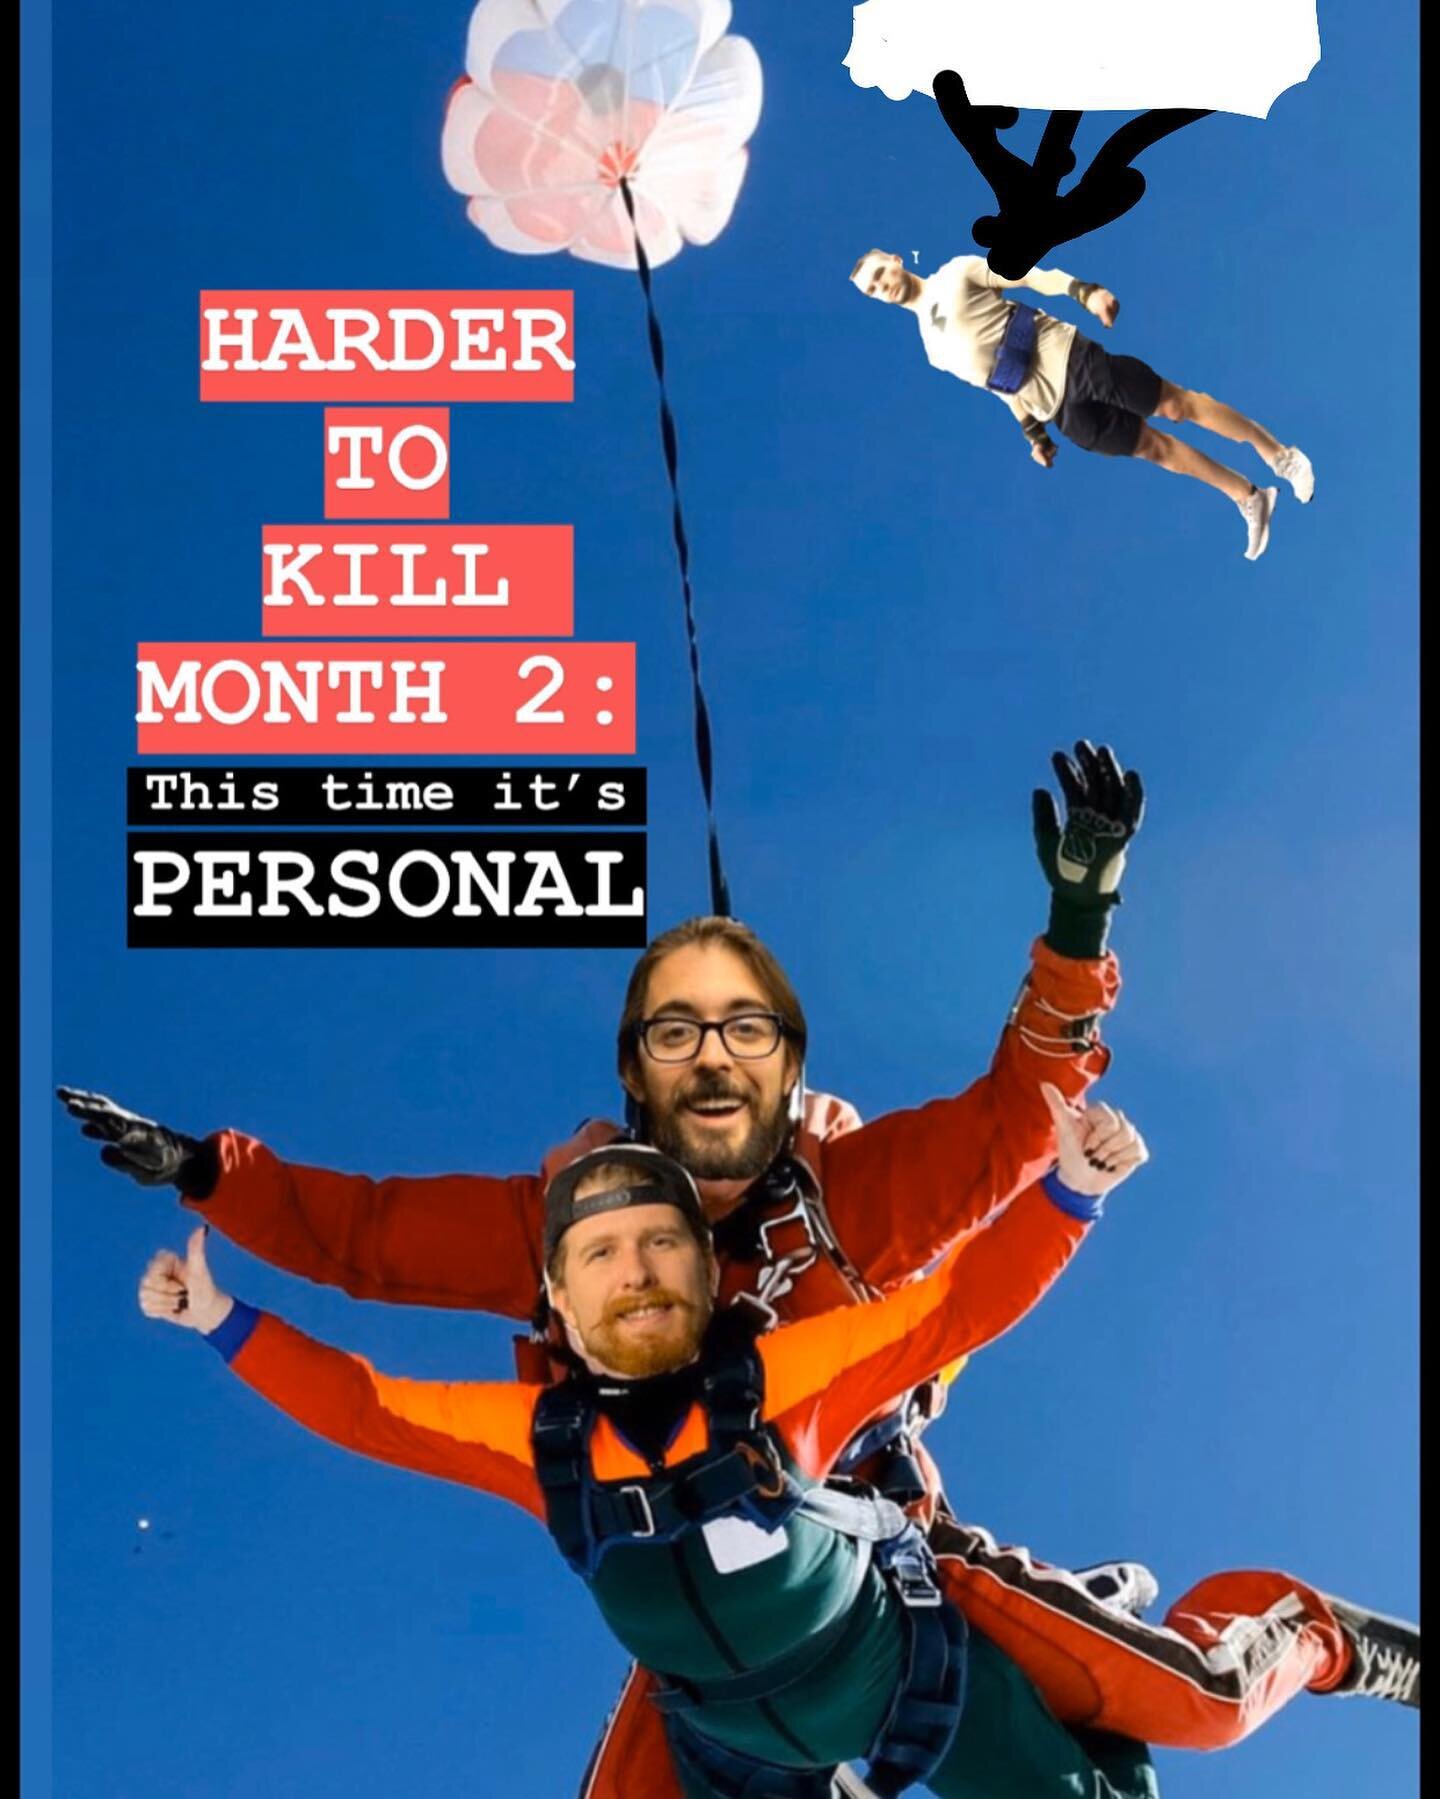 It&rsquo;s test week for first month of harder to kill. Which means month 2 starts next Monday March 2nd, @firehouseabilene . $80 for new class members. $10 deposit holds your spot to have 3 coaches, 16 sessions, and nutrition coaching. Quantifiable 